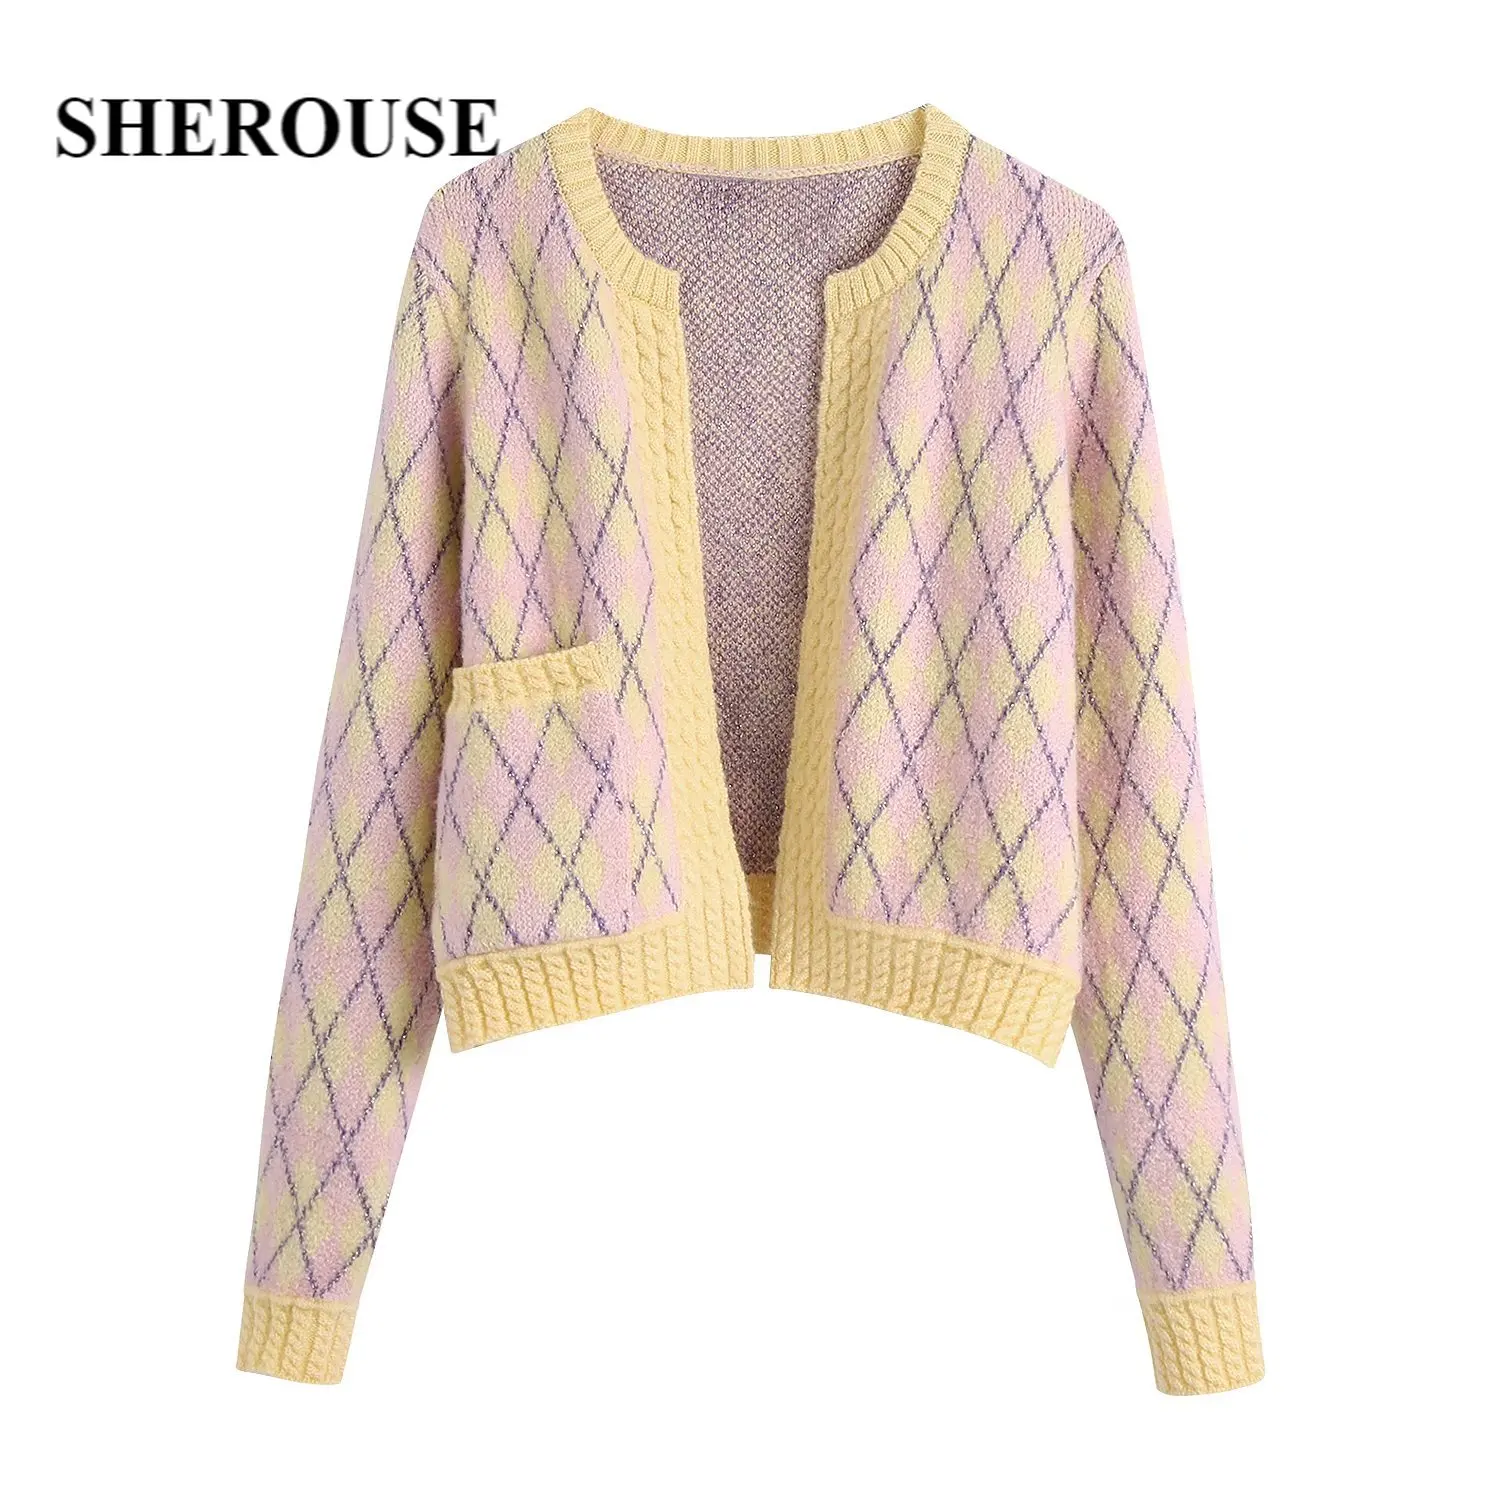 

SHEROUSE Women Fashion Argyle Opening Knitted Cardigan Long Sleeves Round Neckline Vintage Woman Knit Sweater Chic Lady Tops